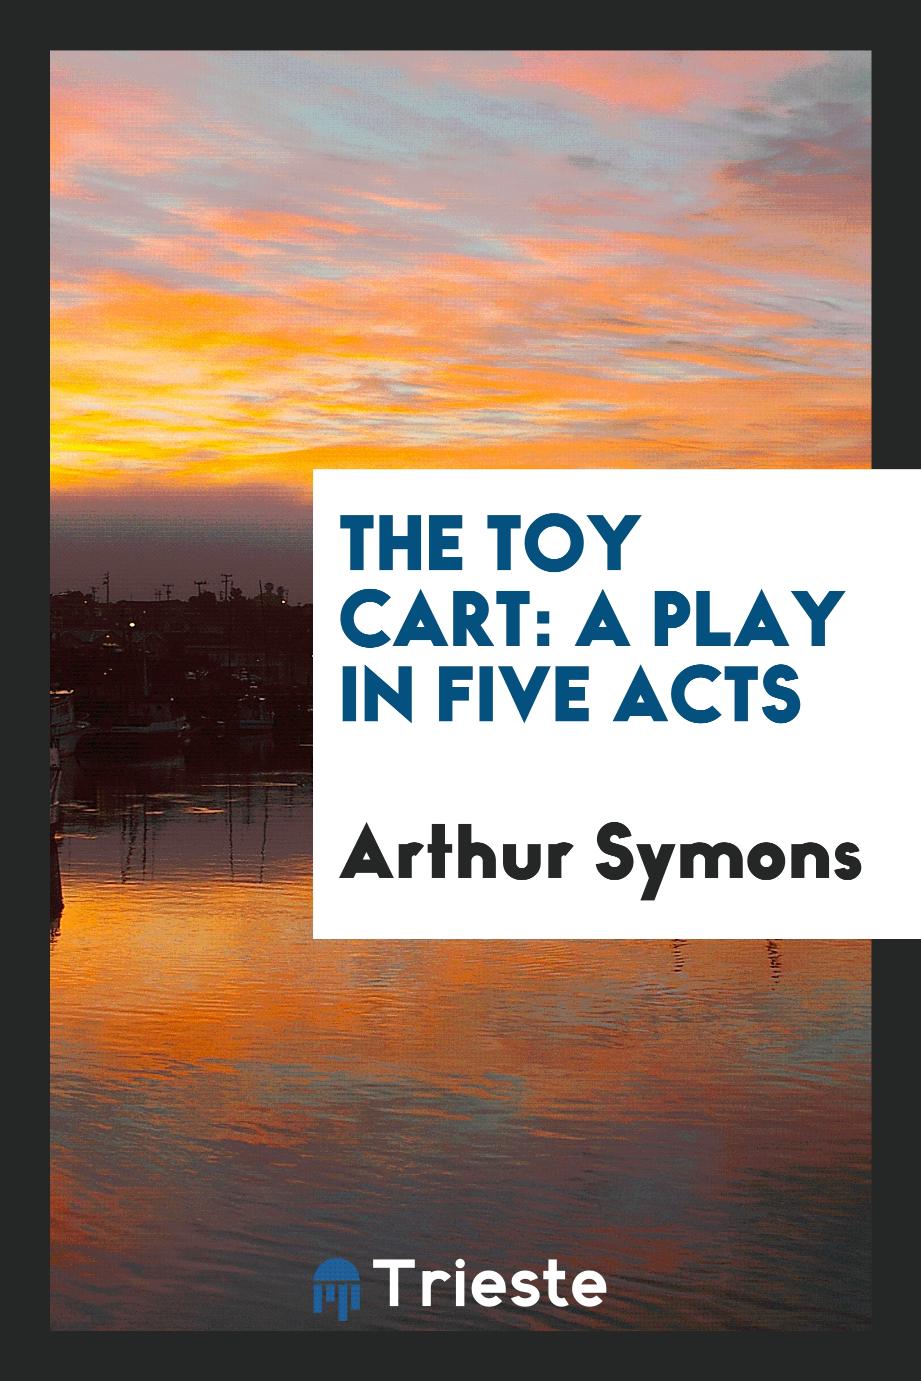 The Toy Cart: A Play in Five Acts